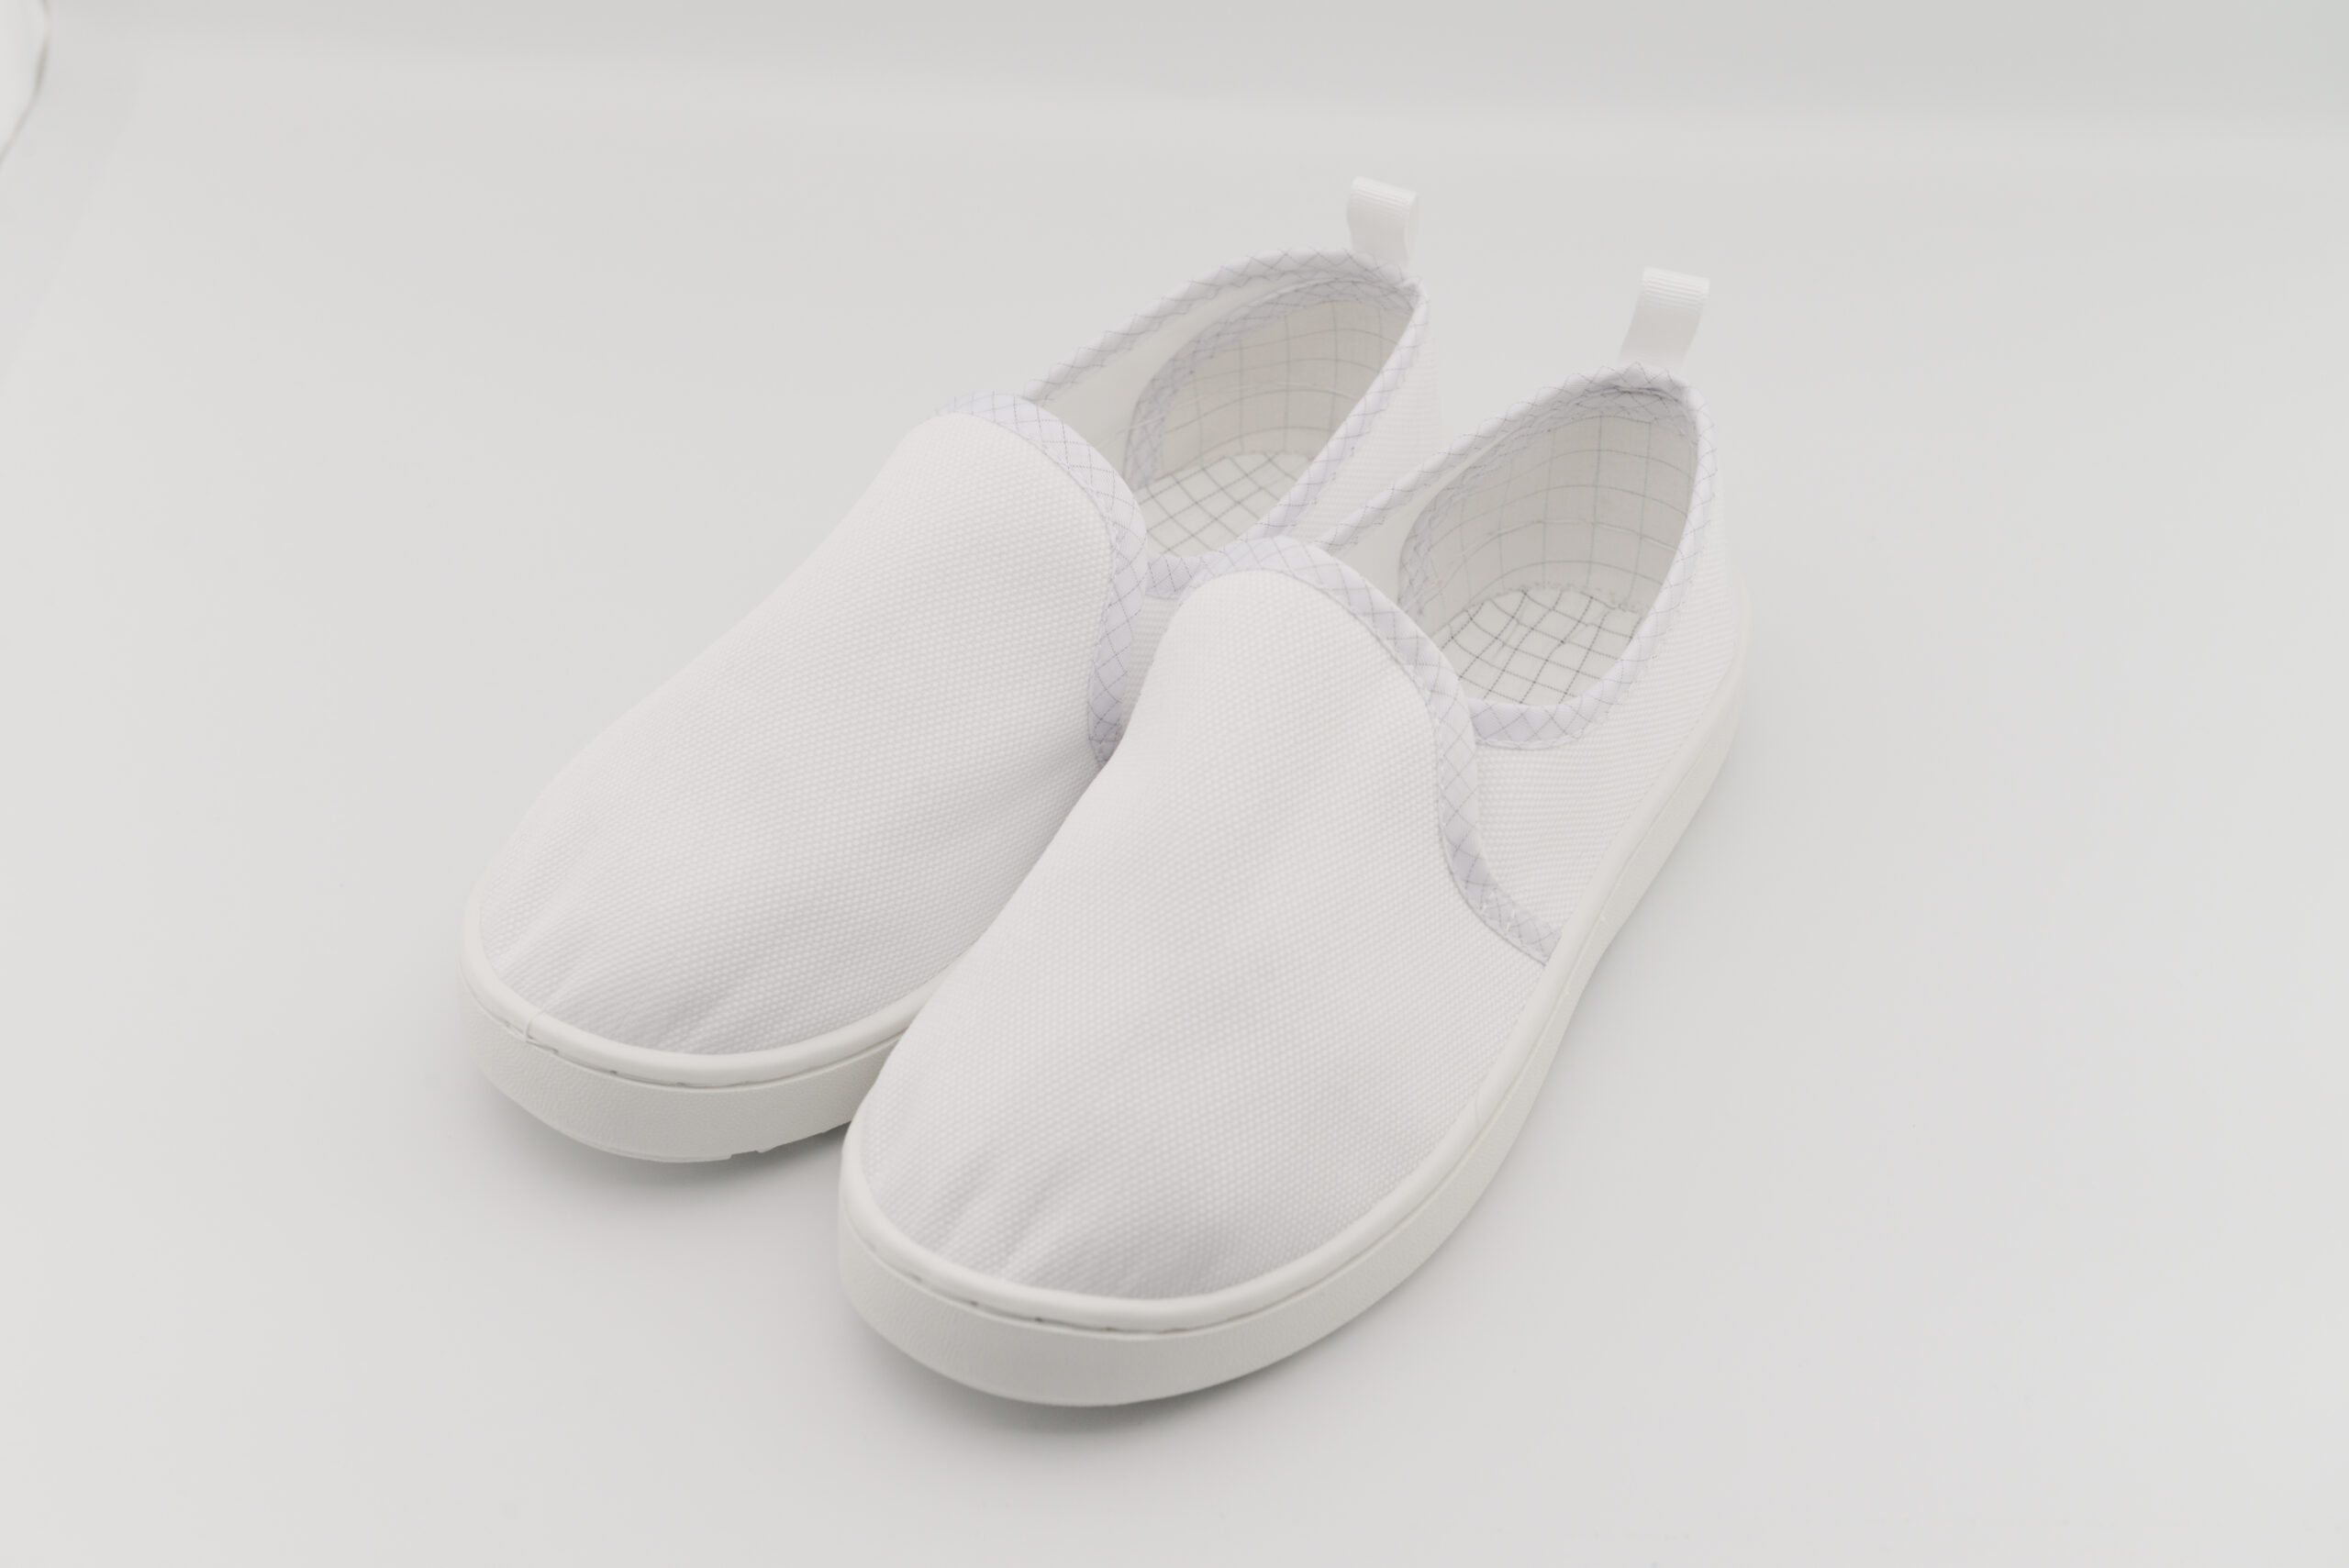 Non-Sterilizable Closed Shoes for Clean Environments - Cleanroom Suit ...